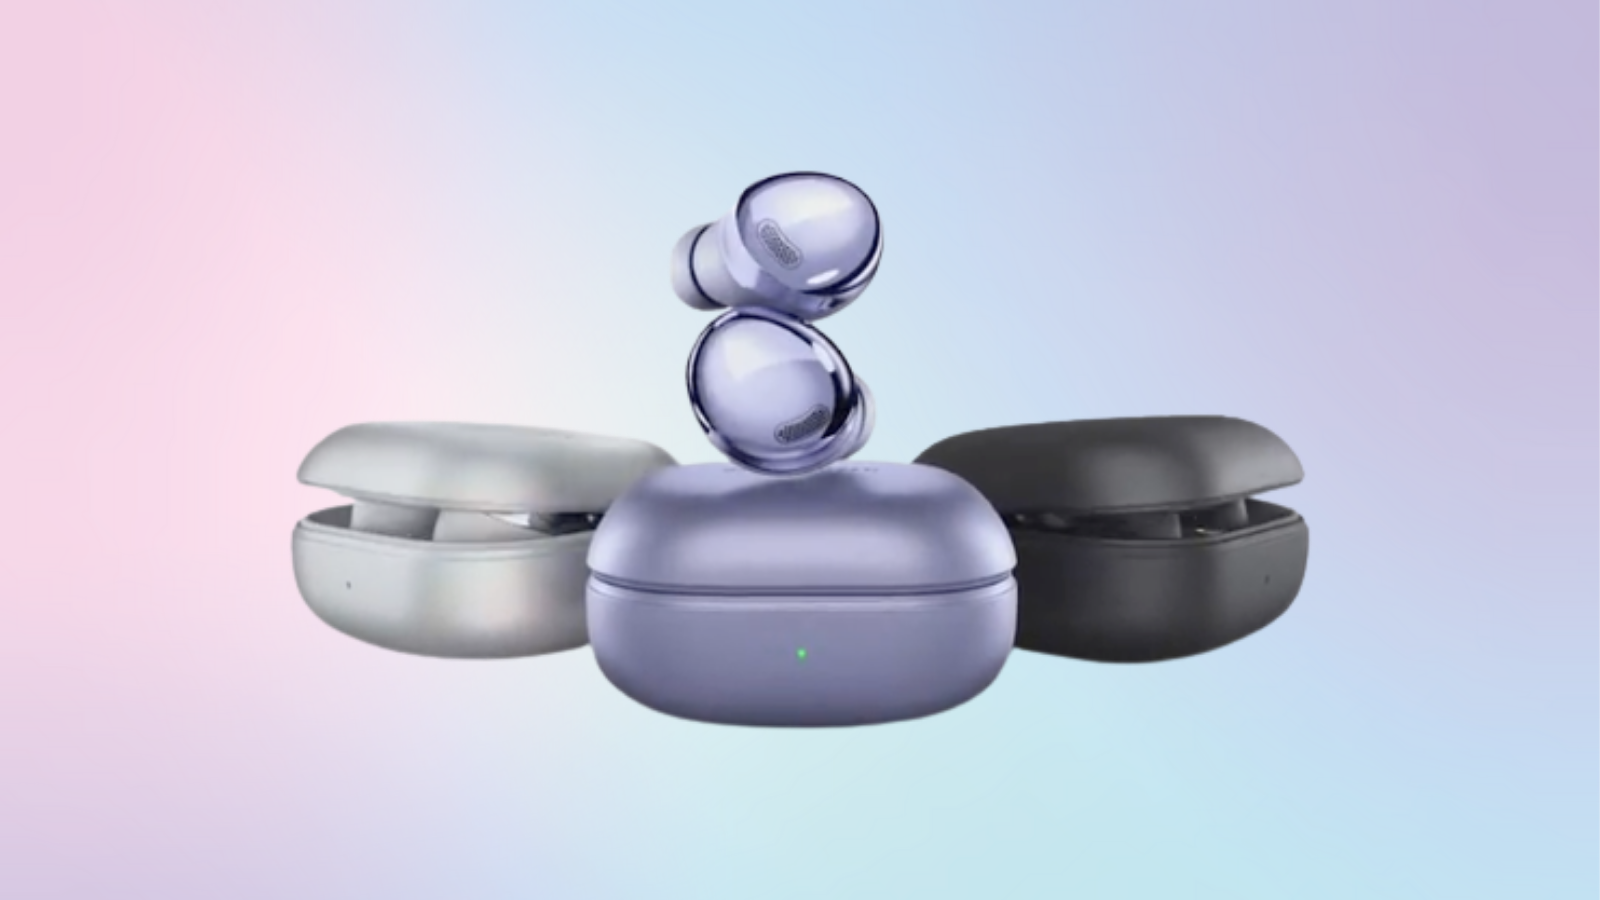 Samsung Galaxy Buds Pro in three different colors